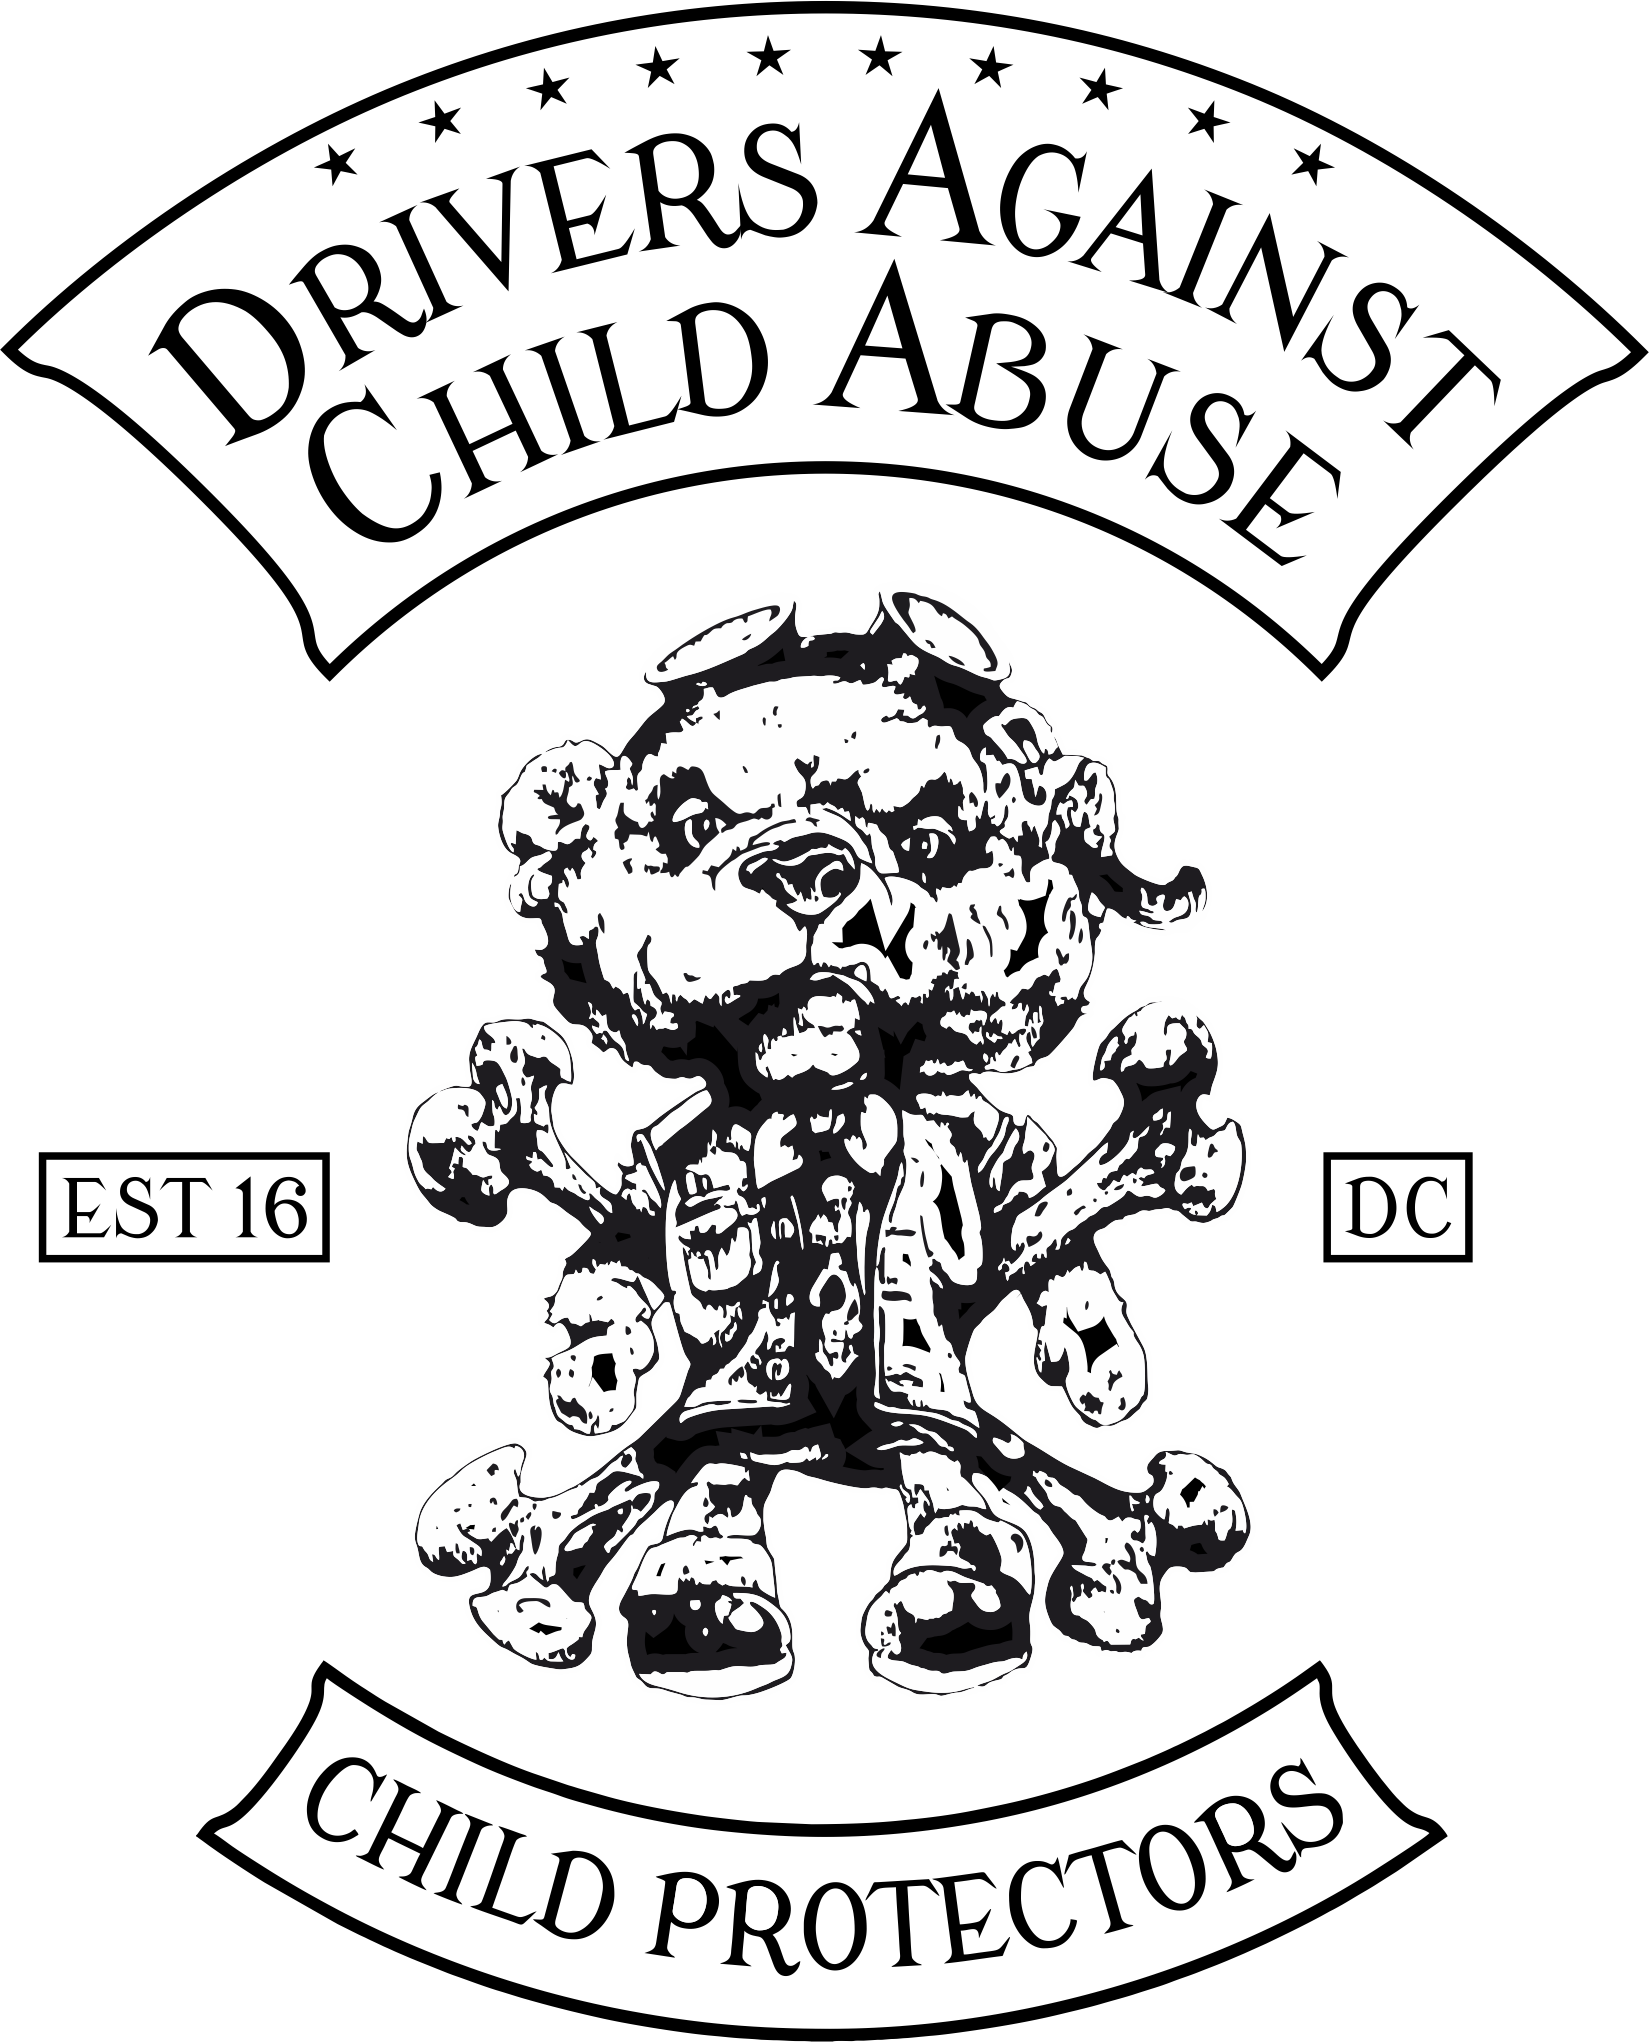 drivers against child abuse logo